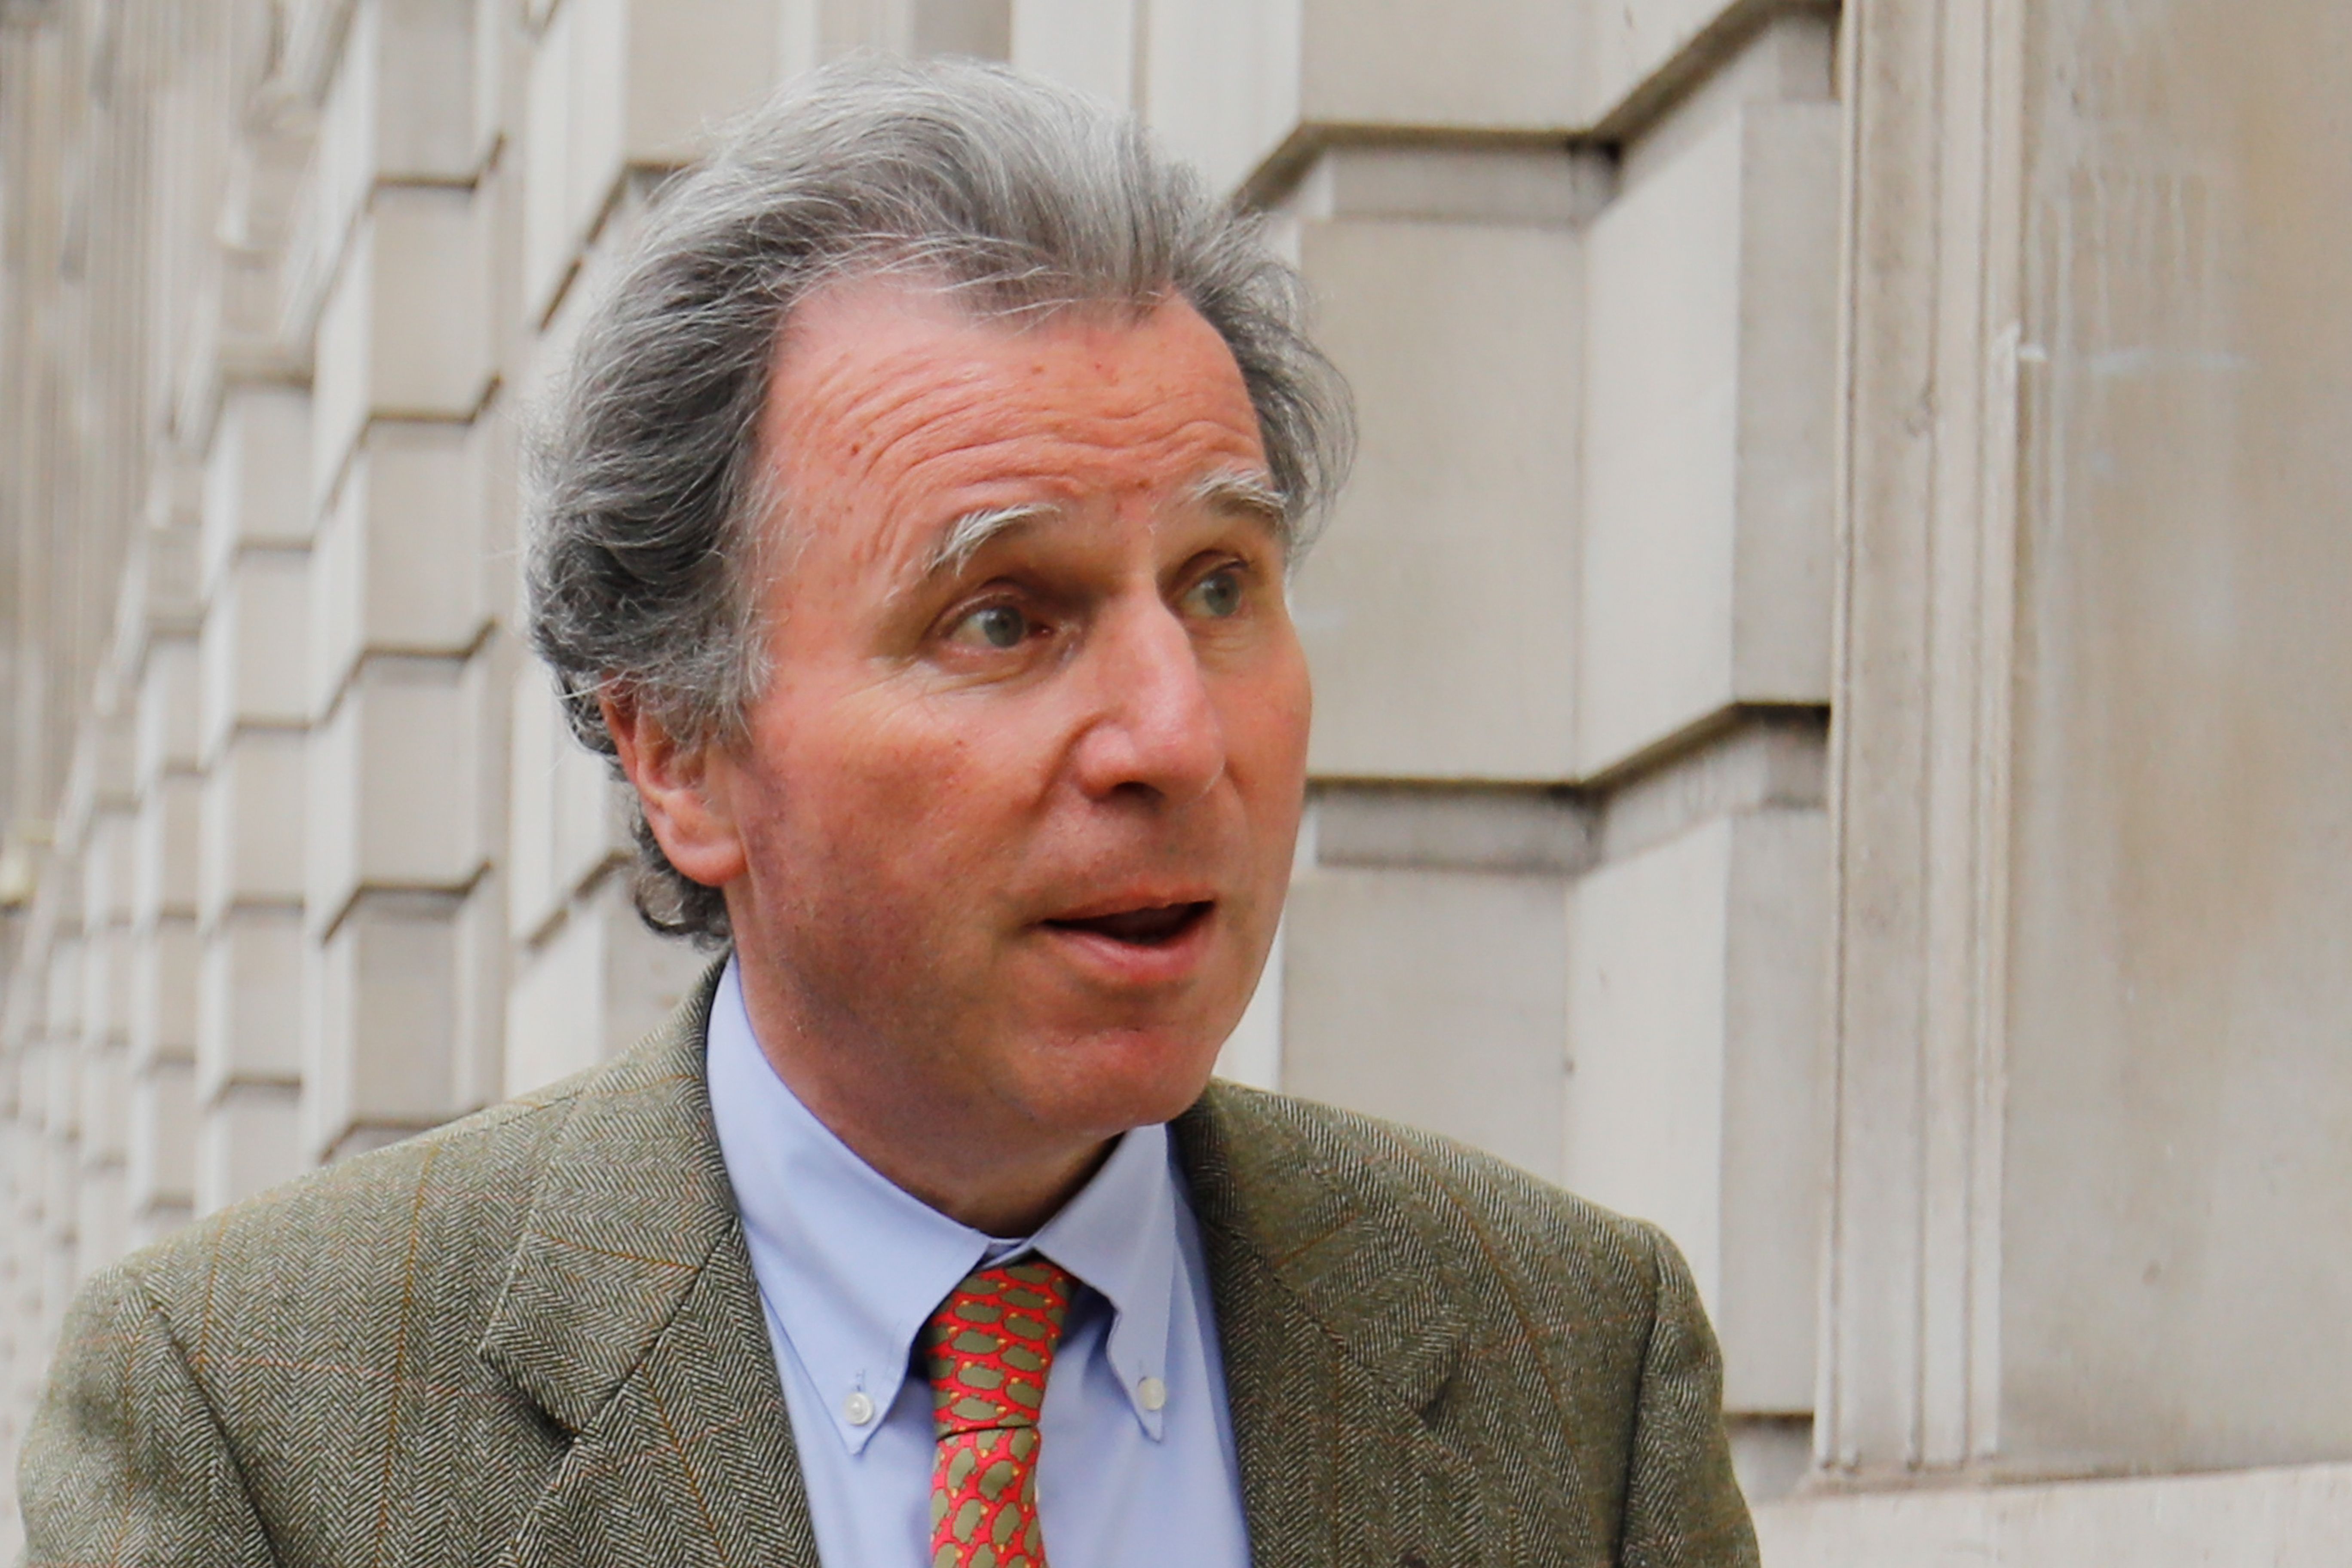 Oliver Letwin brought about the indicative votes through an amendment to May's Brexit plan.